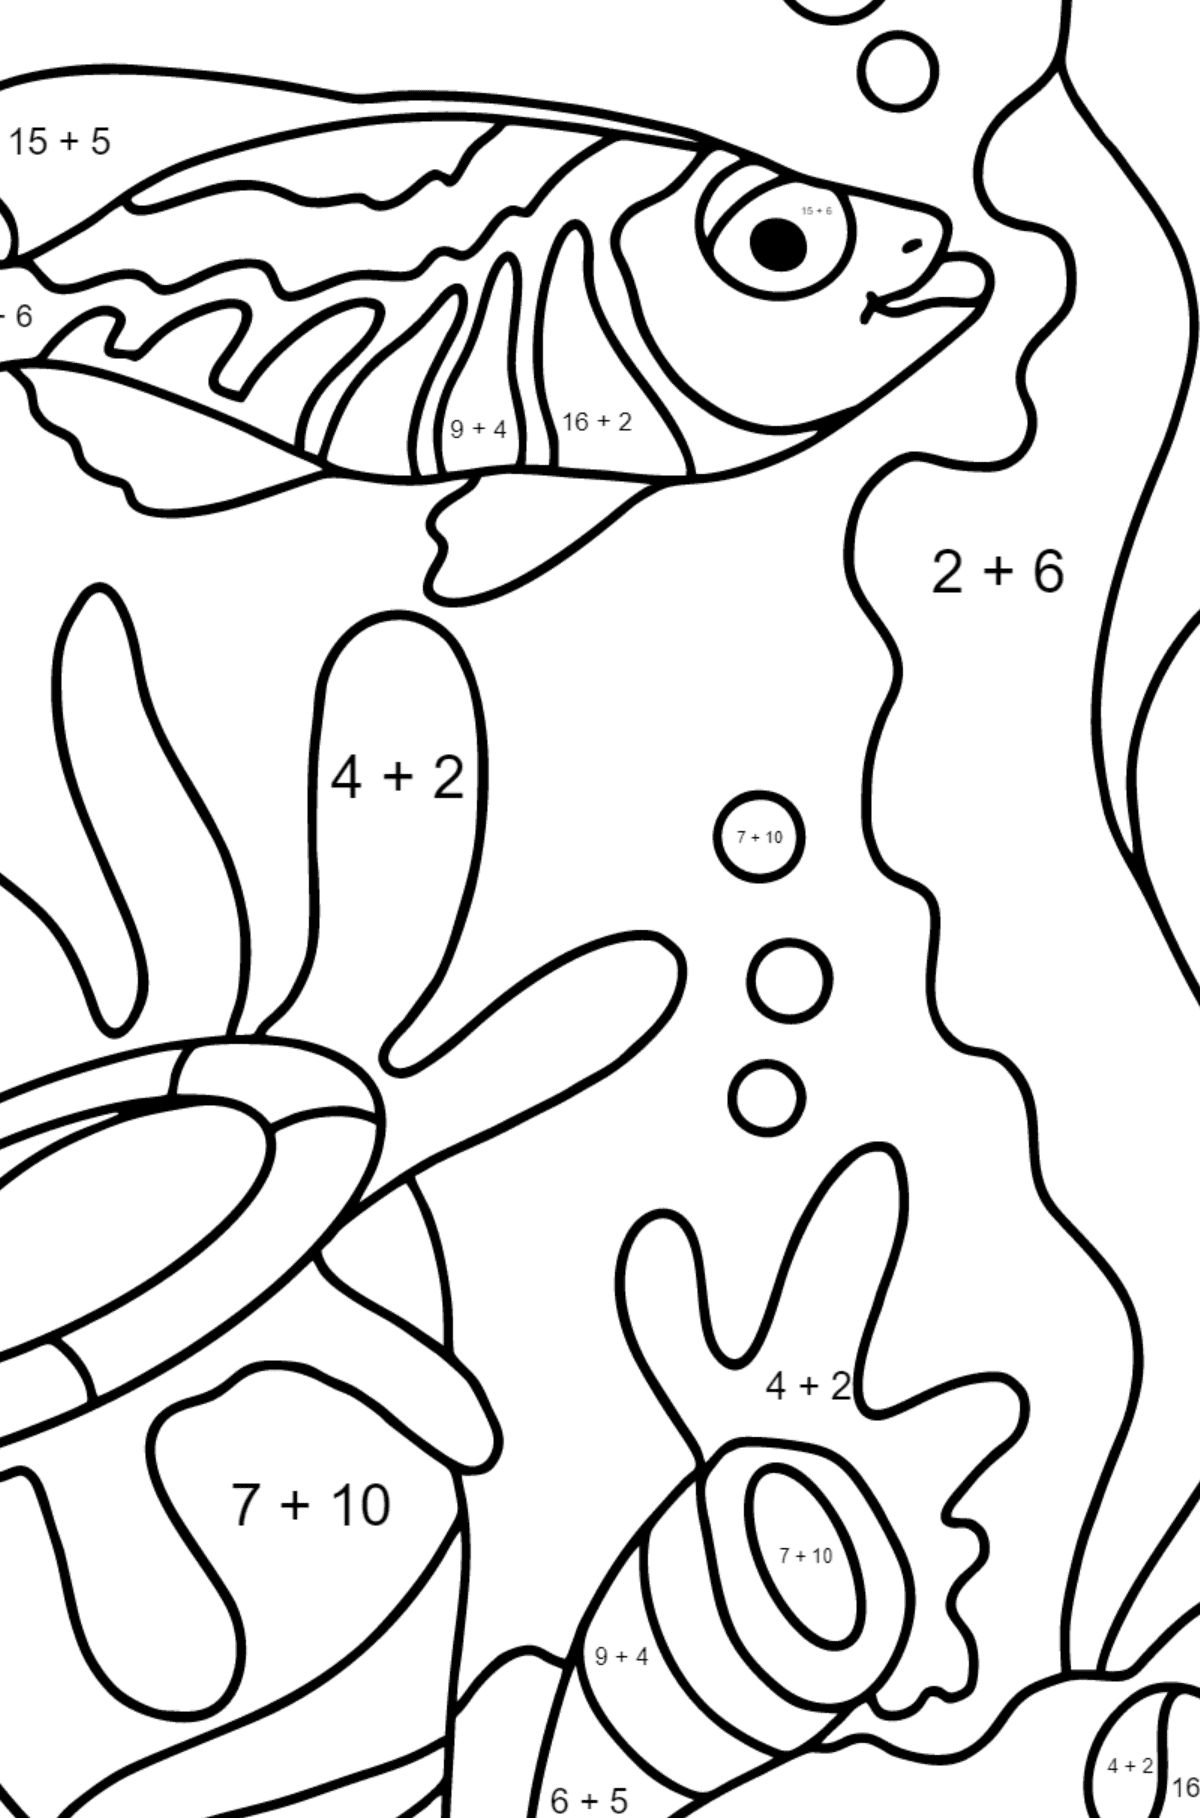 Coloring Page - A Fish is Admiring the Corals - Math Coloring - Addition for Kids